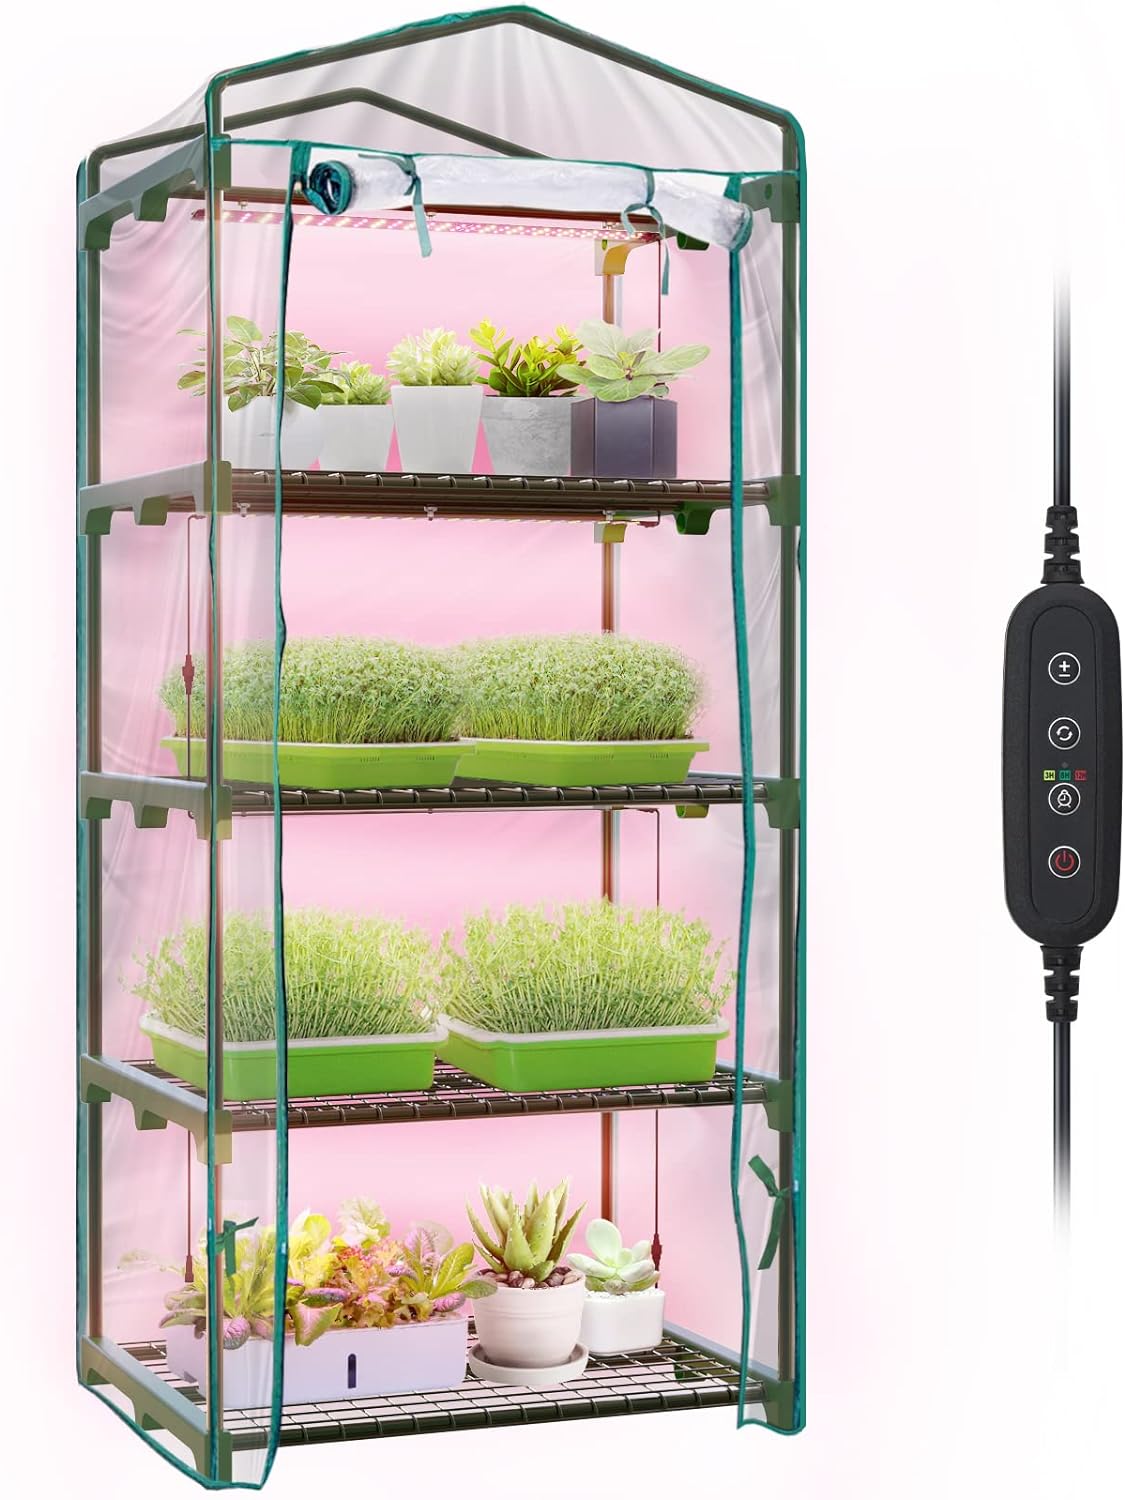 Mini Greenhouse with Grow Light , 4 Tier 27.2L×19.9W×61.8H Portable Greenhouse with Zippered PVC Cover for Seed Starting Trays , Dimmable 2ft 60W Plant Light for Indoor Plant with Timer by Bstrip